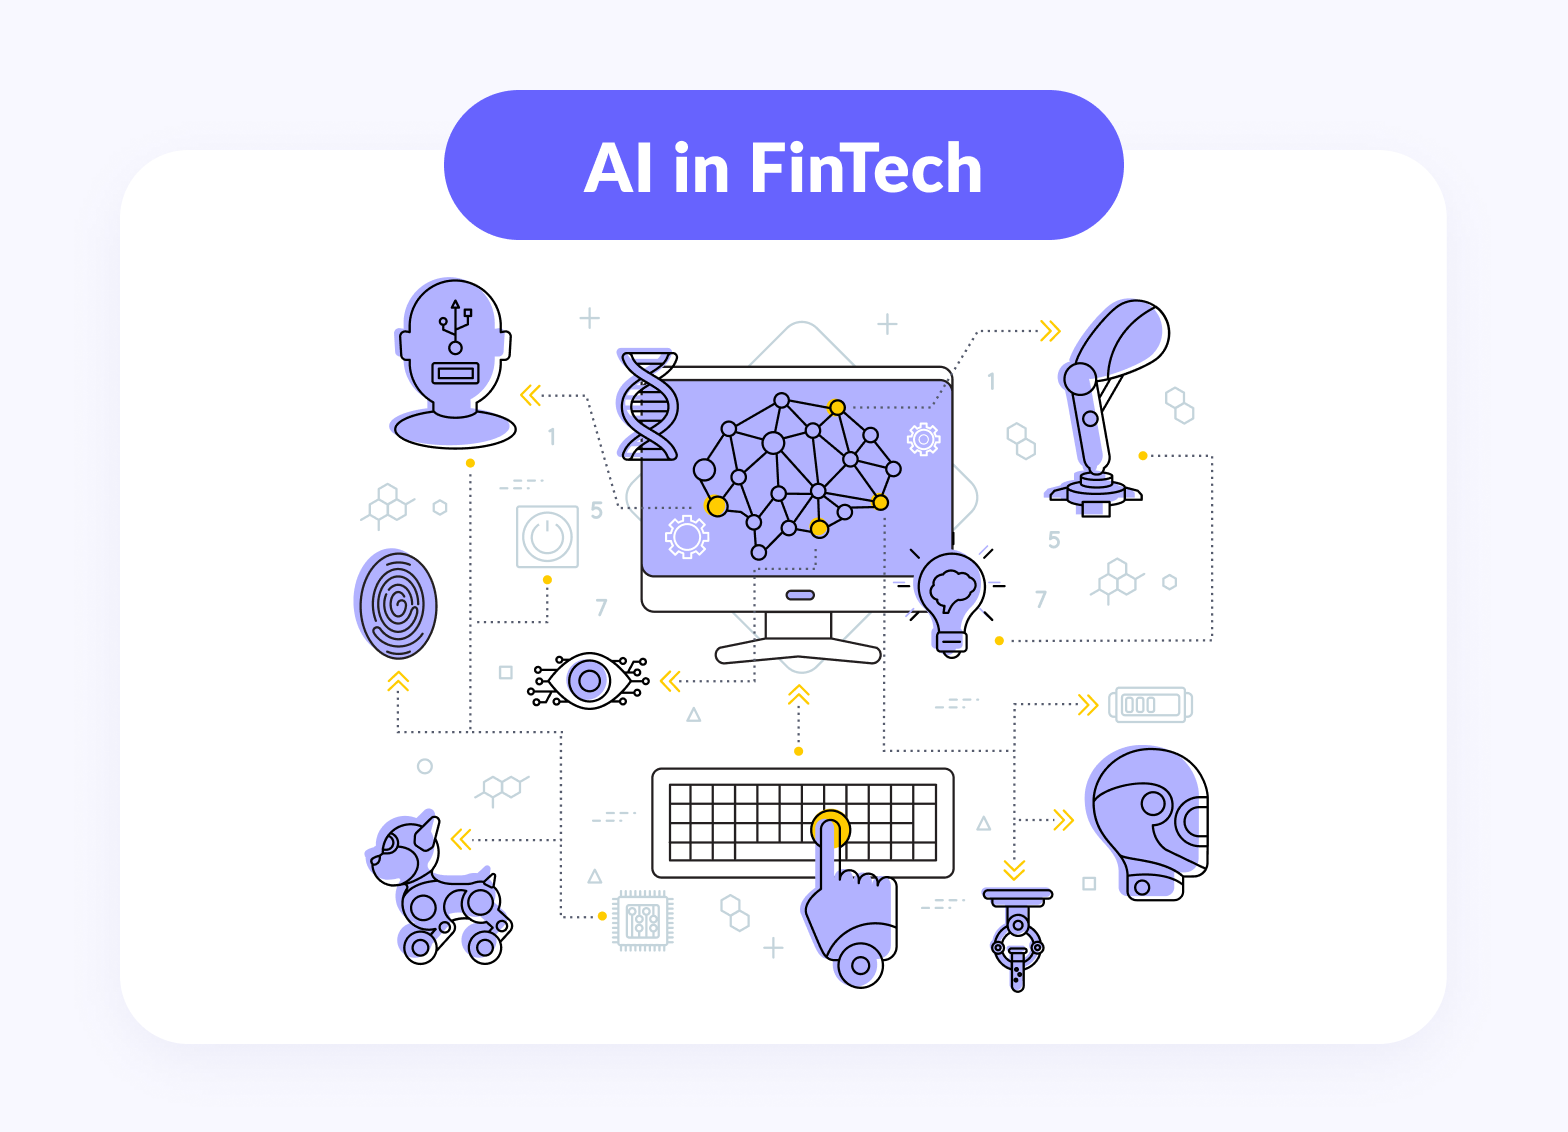 Reasons for Embracing AI in the FinTech